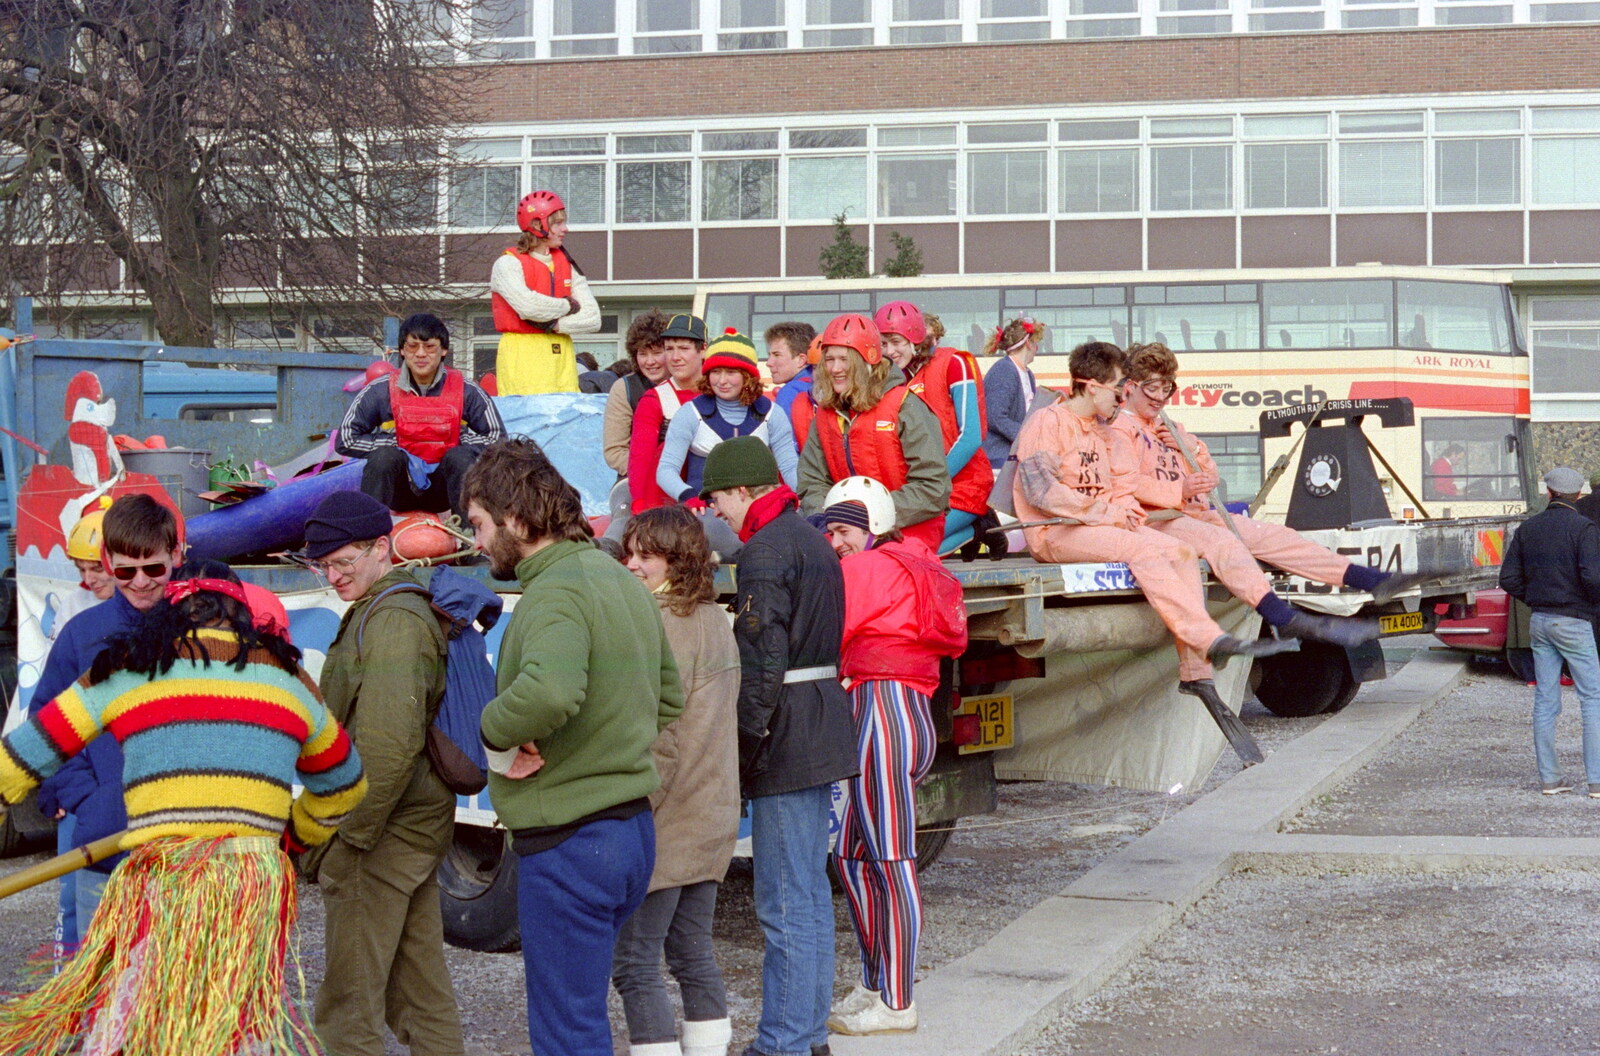 Assembling outside the Engineering block from Uni: PPSU "Jazz" RAG Street Parade, Plymouth, Devon - 17th February 1986